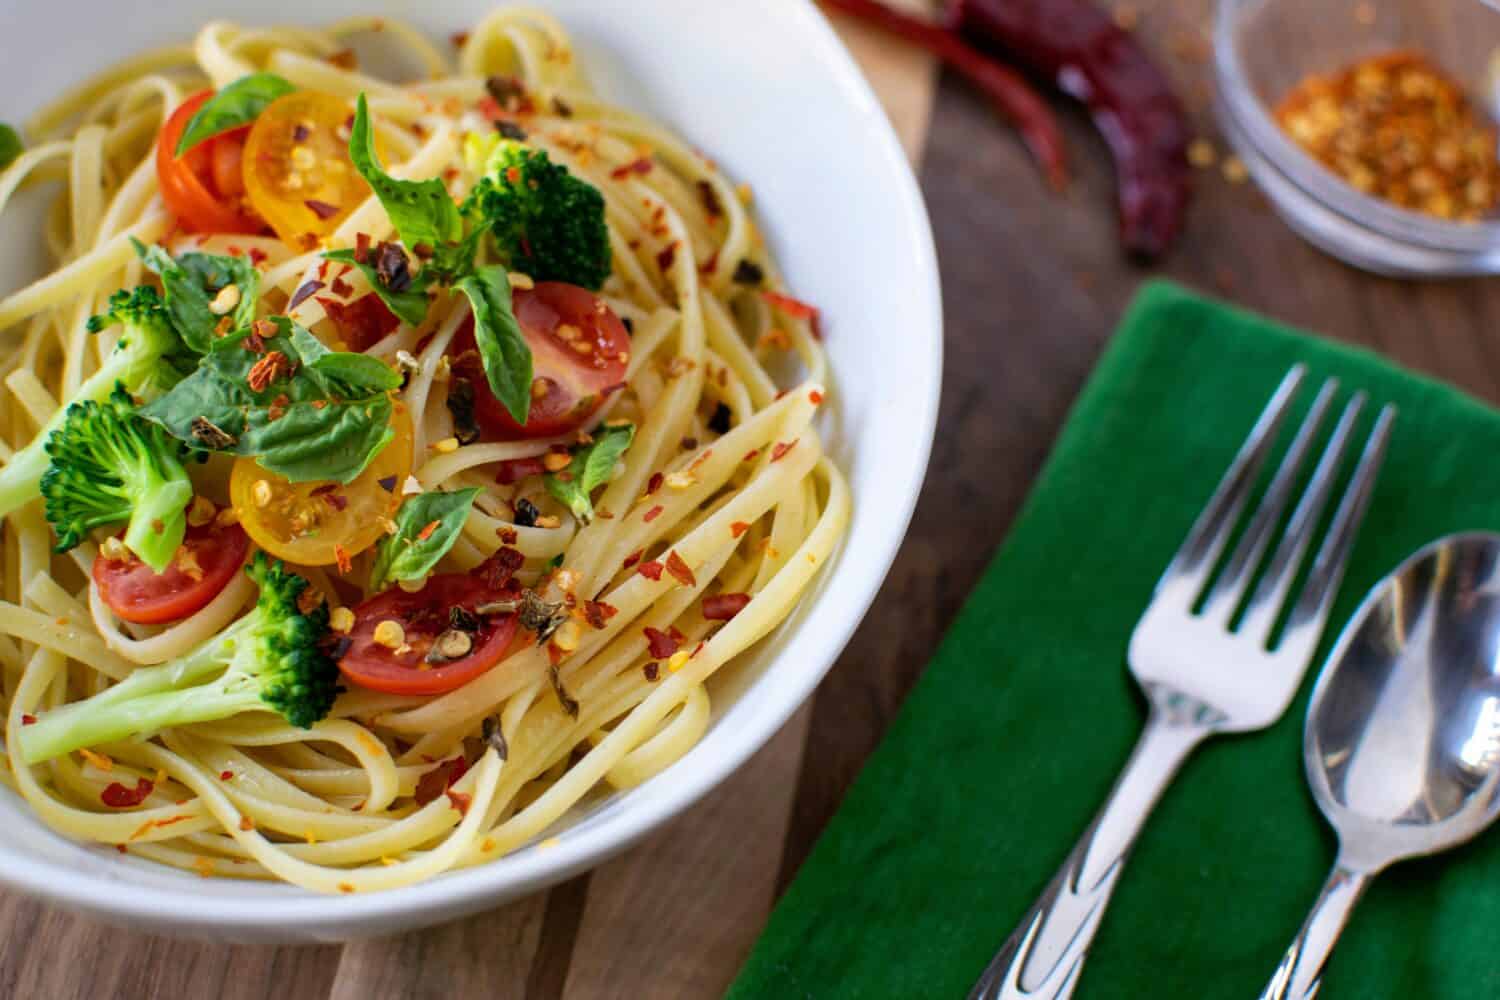 Vegetarian Pasta with Olive Oil, Broccoli, Basil, Cherry Tomatoes and Pepper Flakes